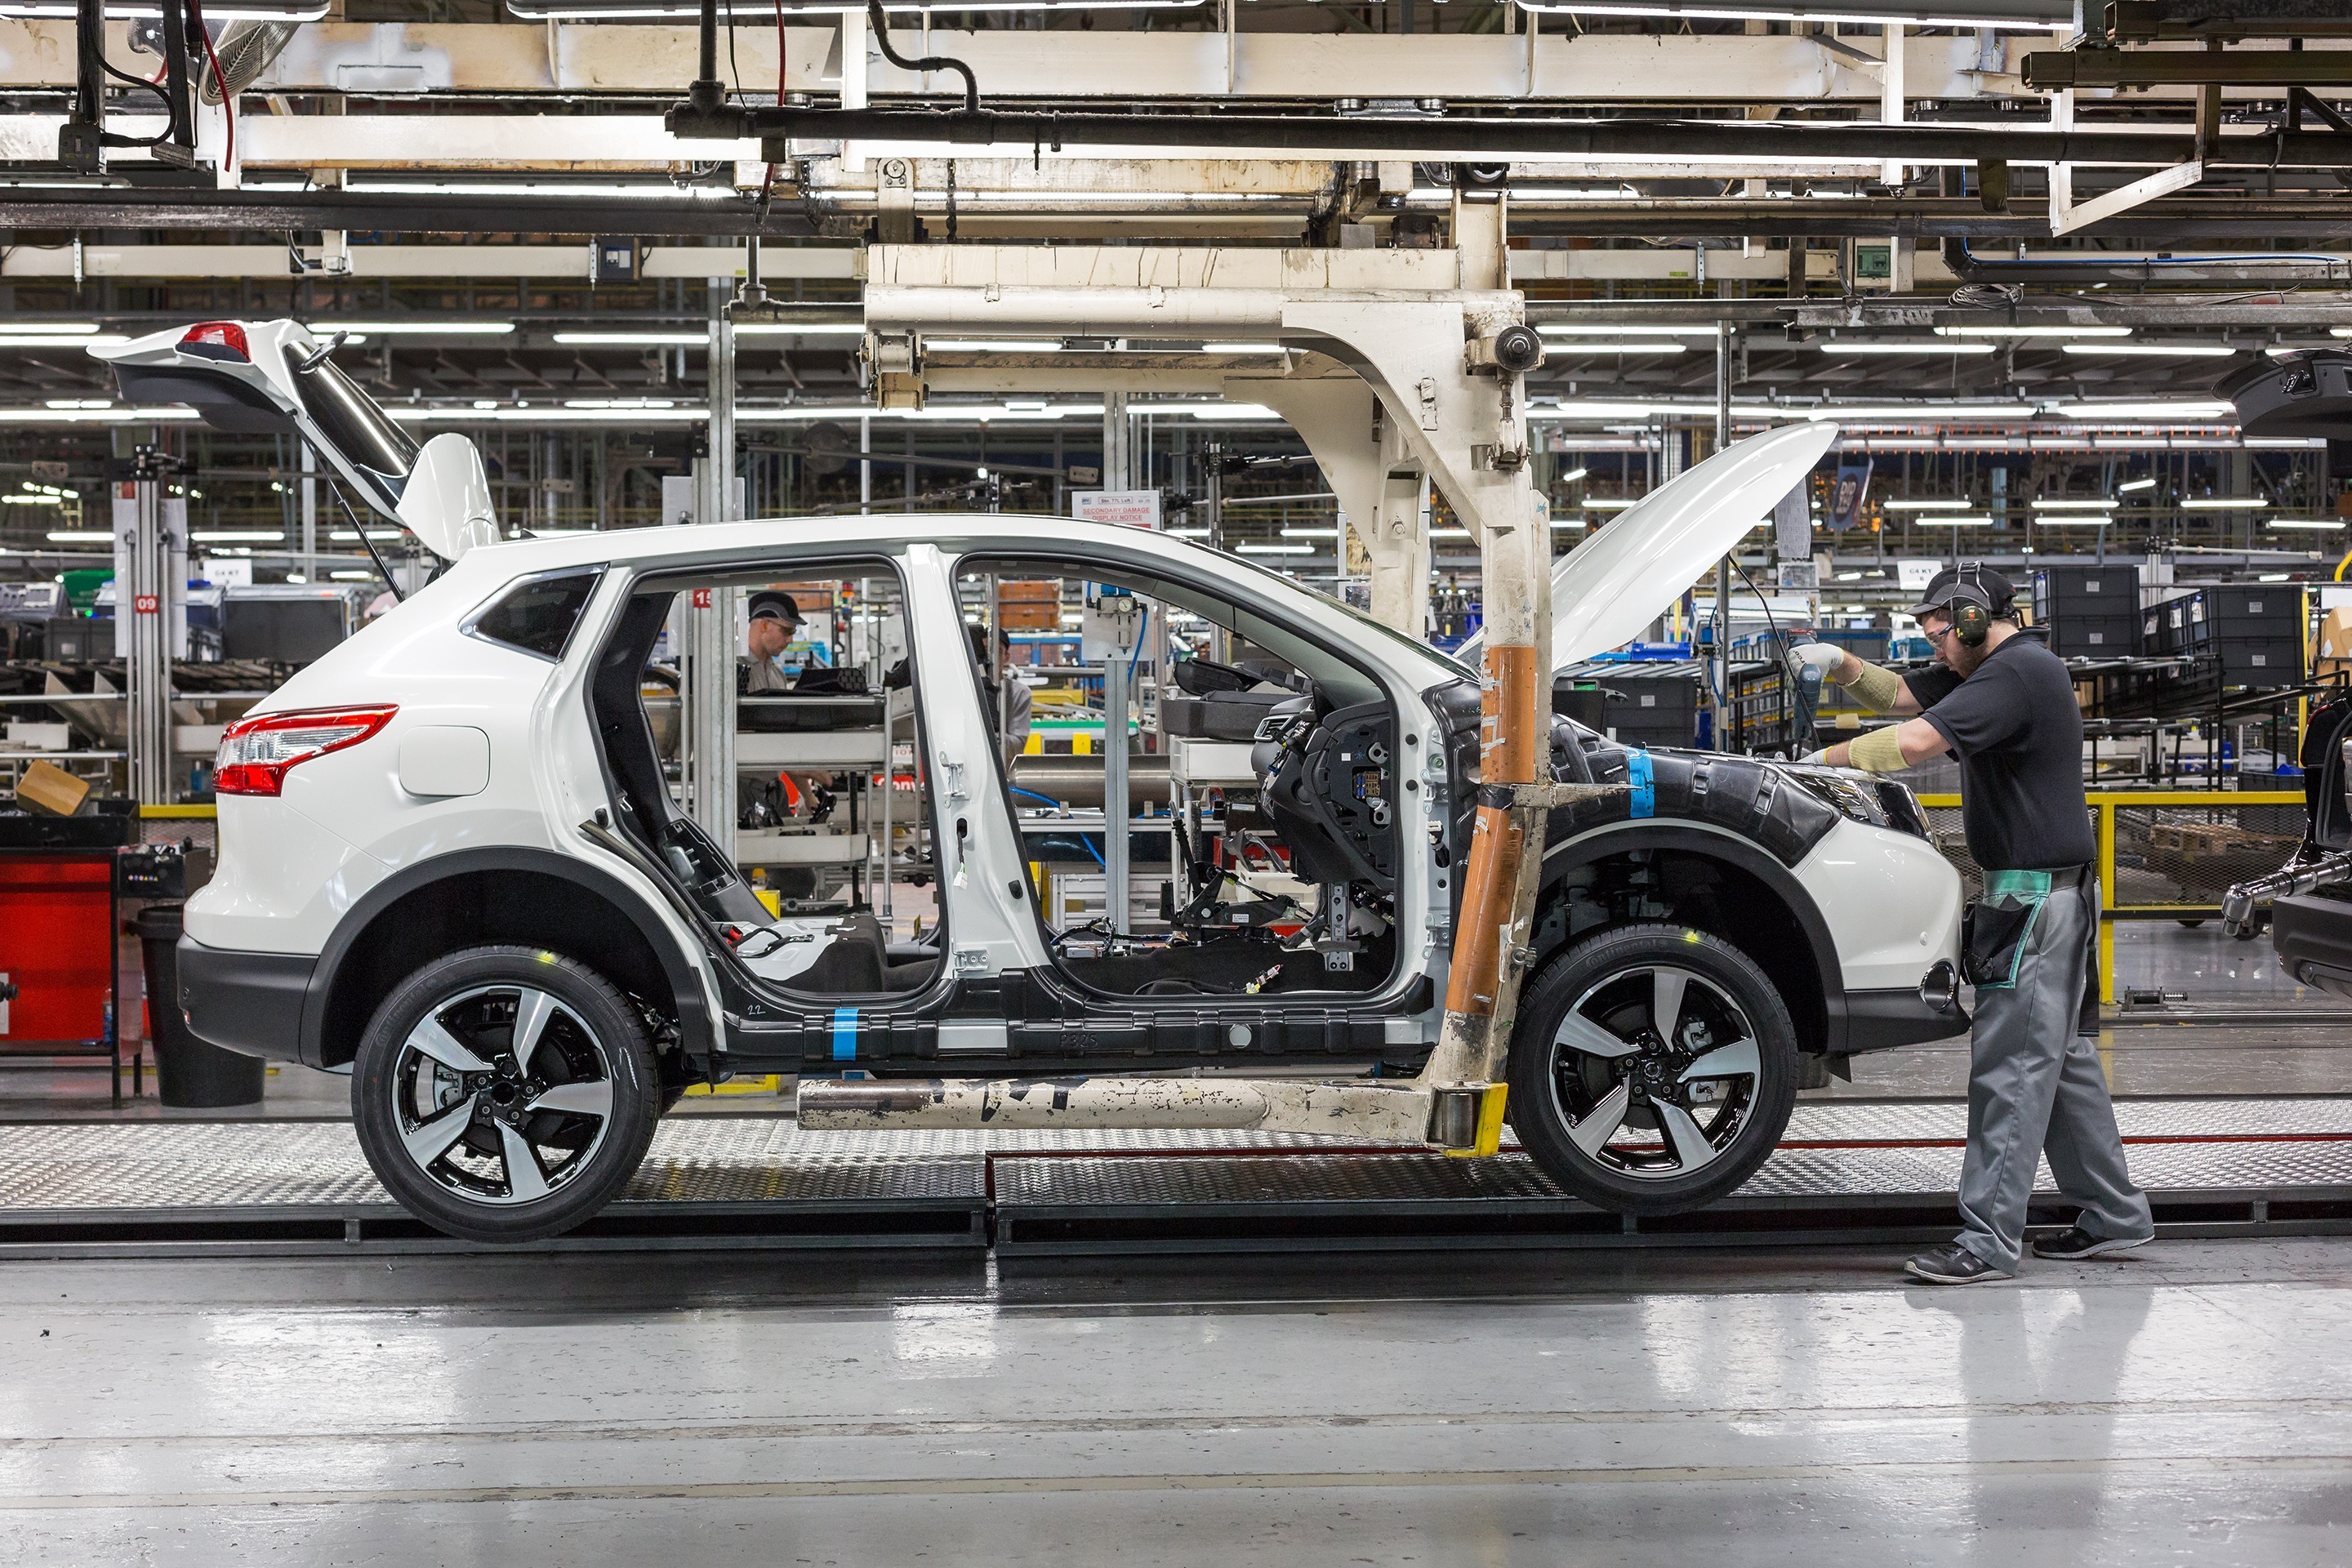 The Nissan Qashqai will have self-driving features from next year